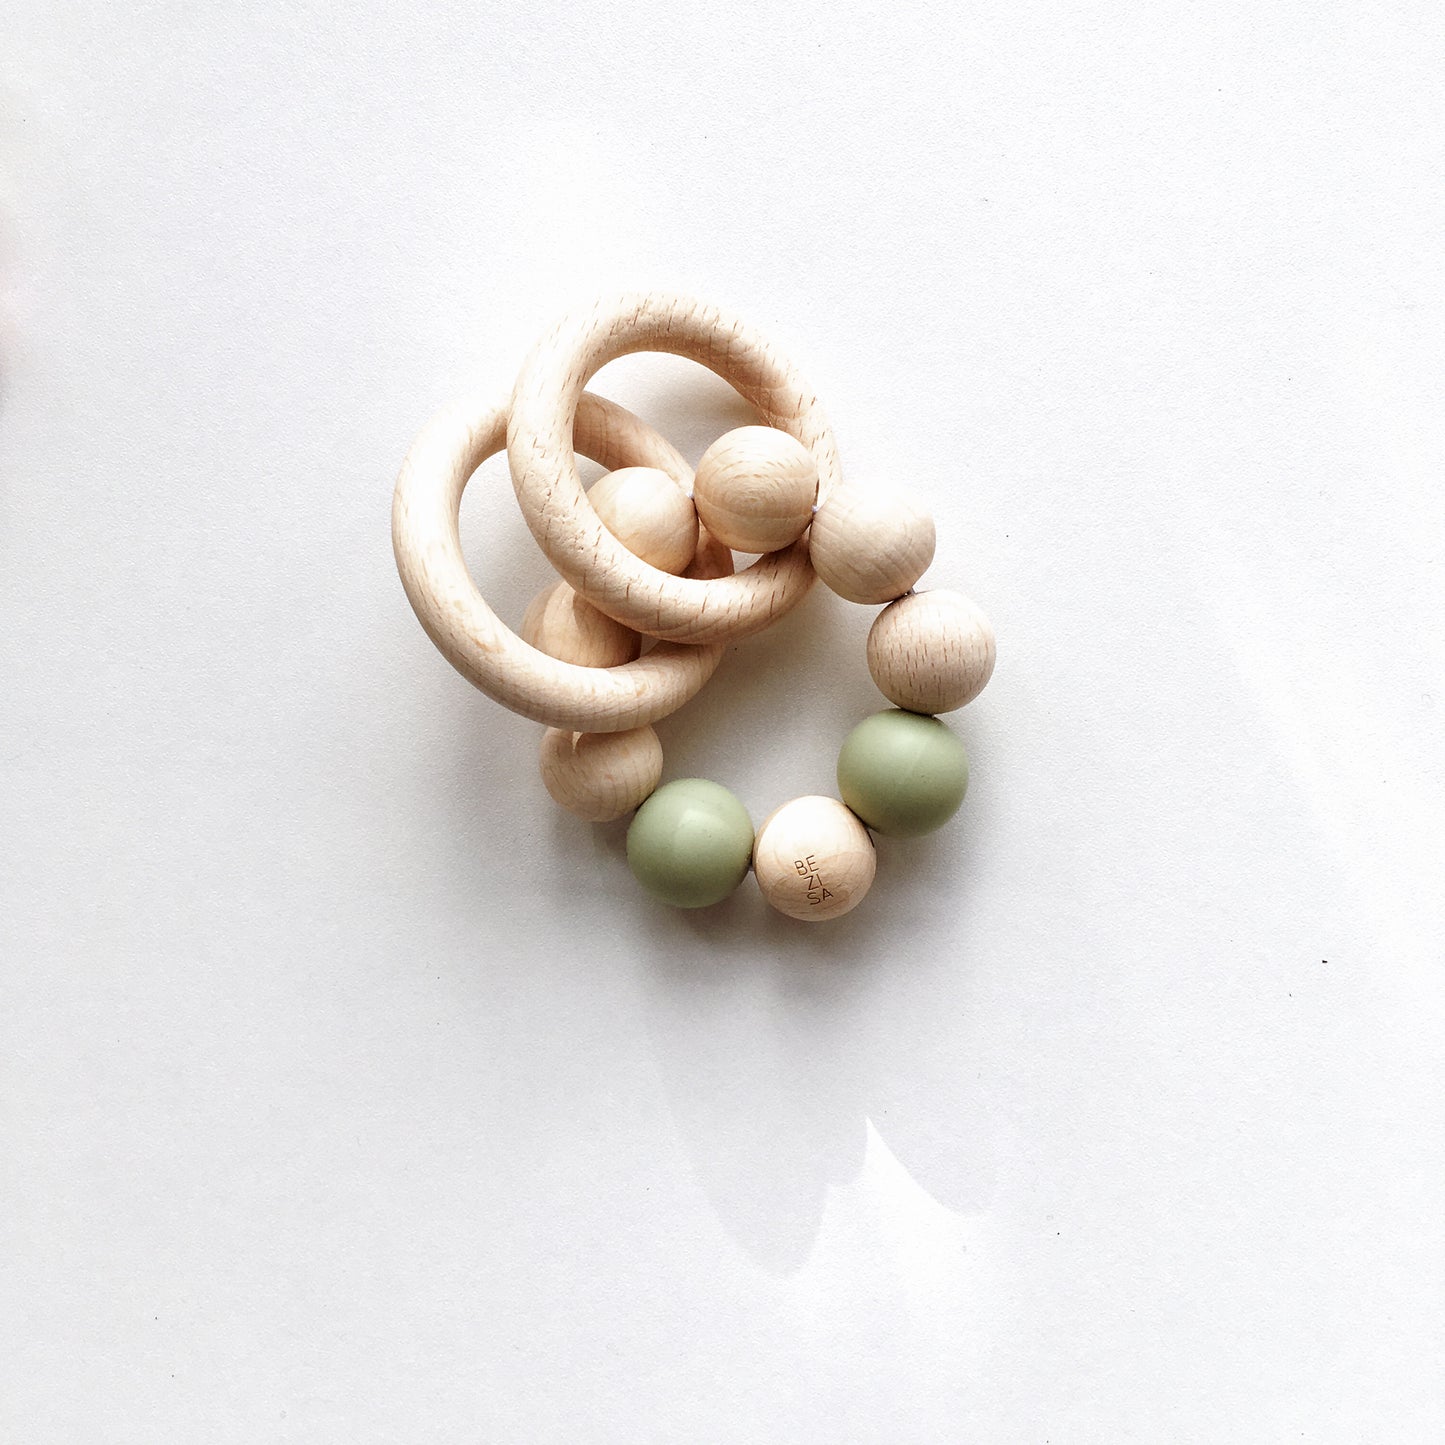 Bezisa wooden baby rattle with a mix of round wooden beads and pisatchio coloured 100% silicone beads, plus two wooden rings. Product is photographed on a plain white background.